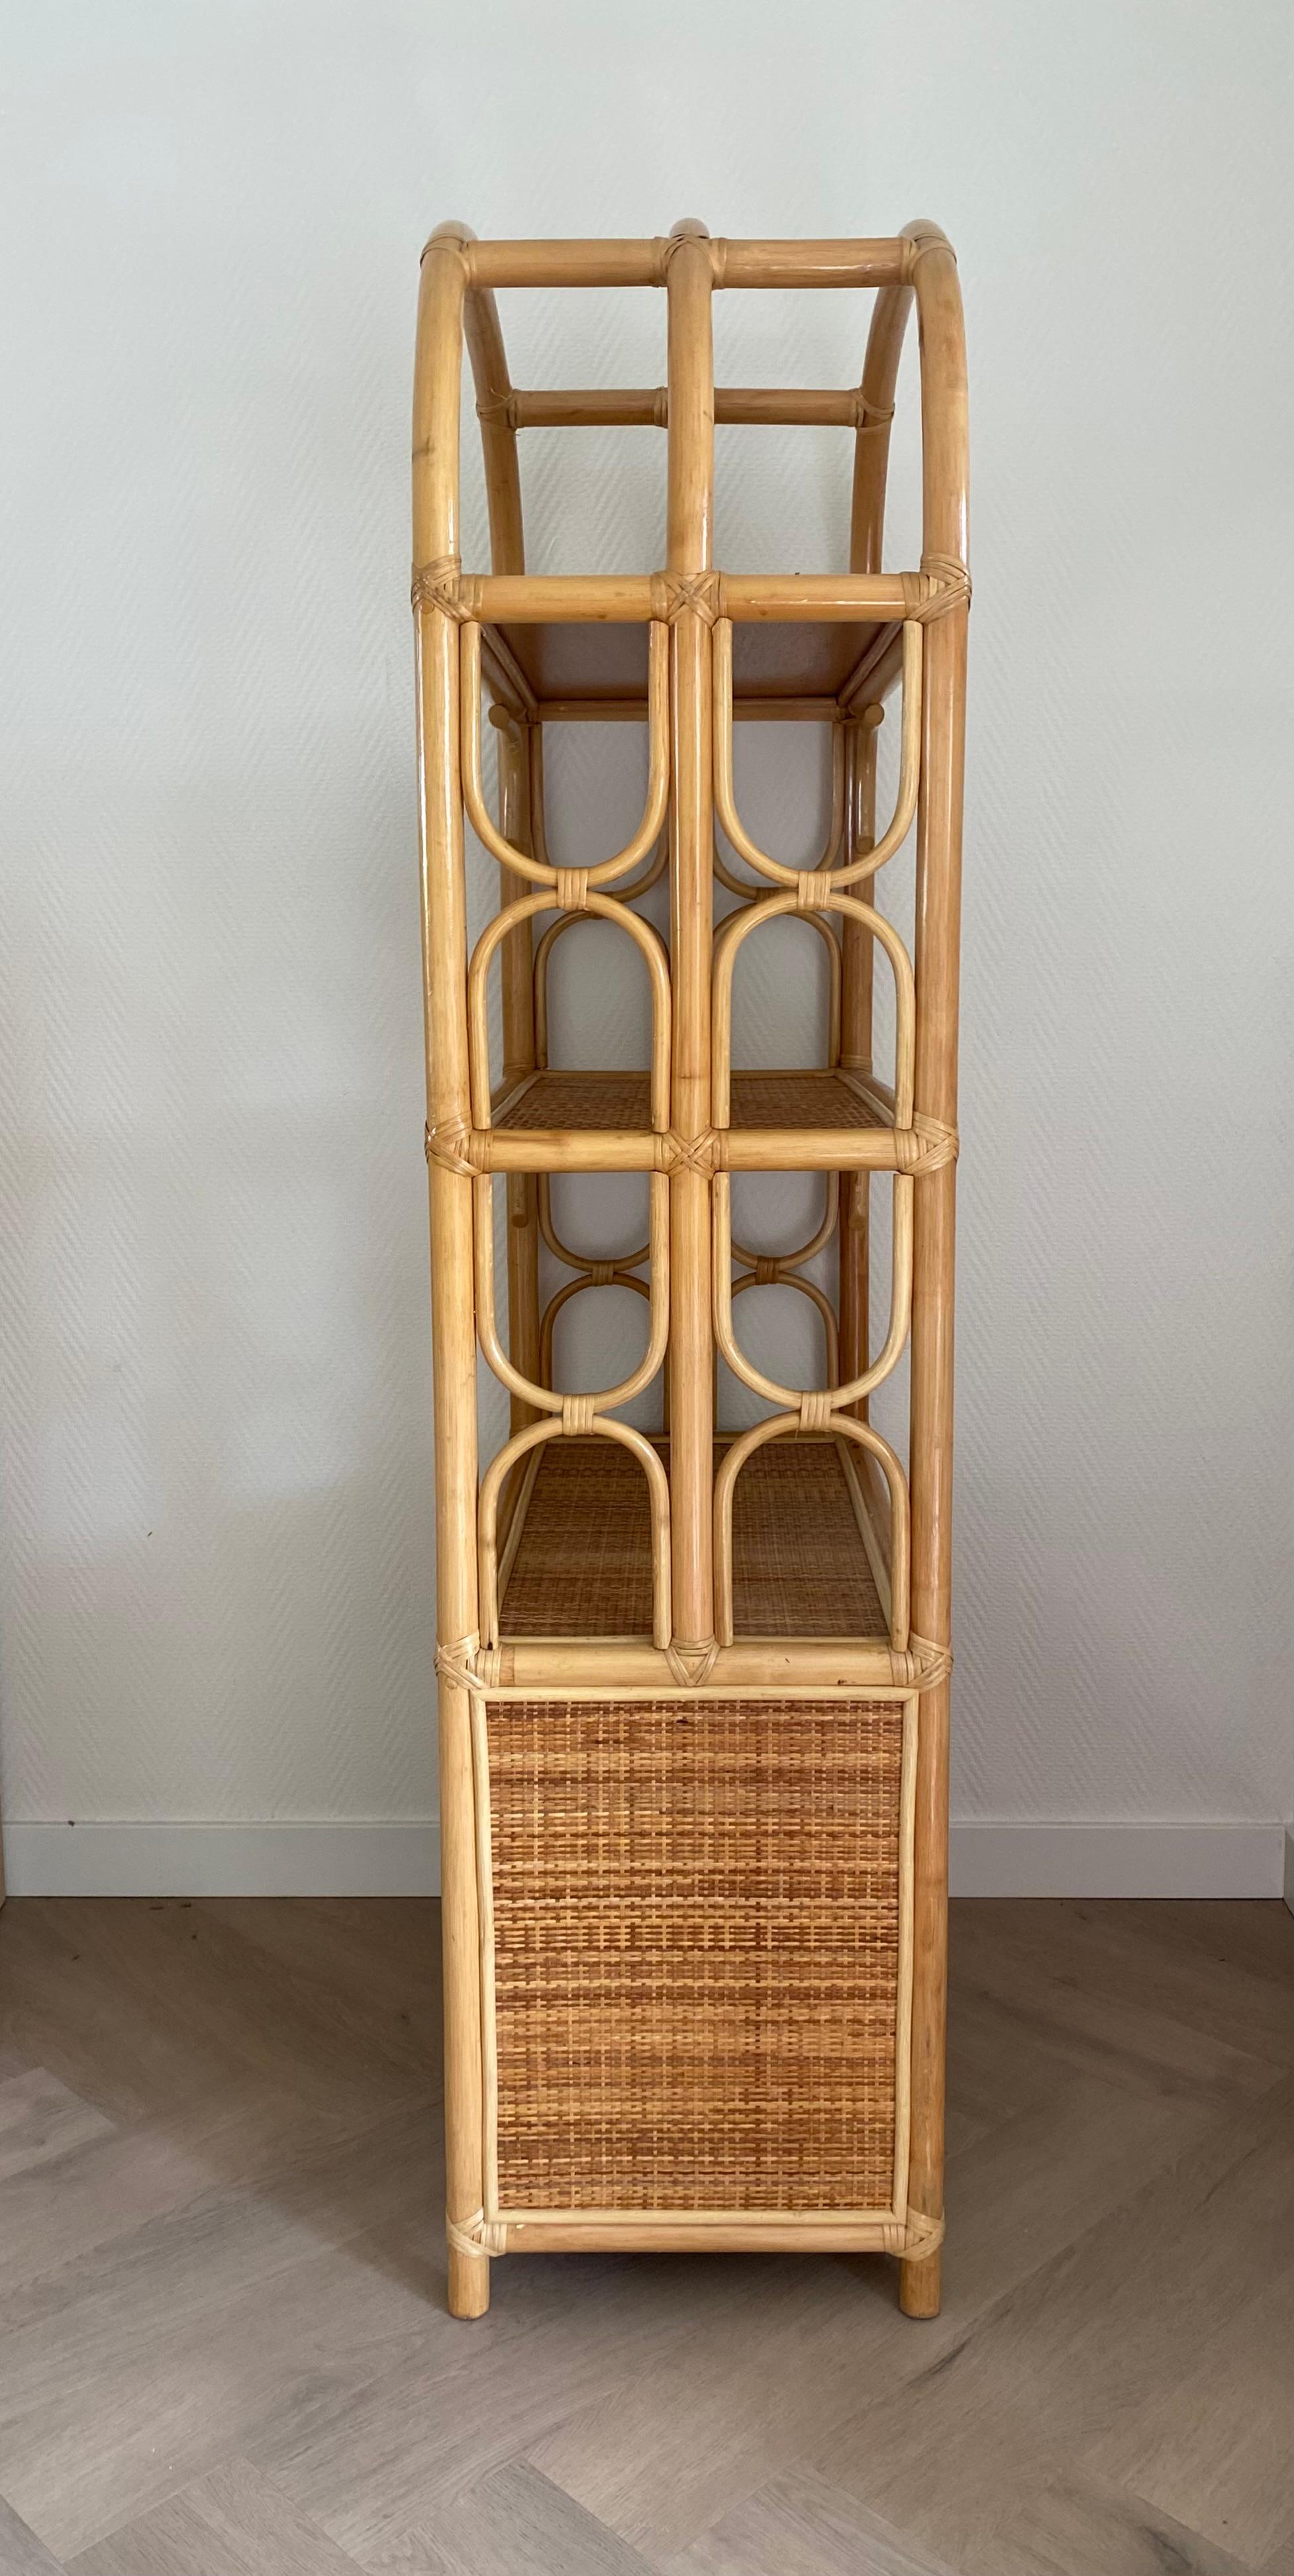 Vintage Rattan Boho Chic Bookcase, Cabinet with doors Ca. 1970s For Sale 1